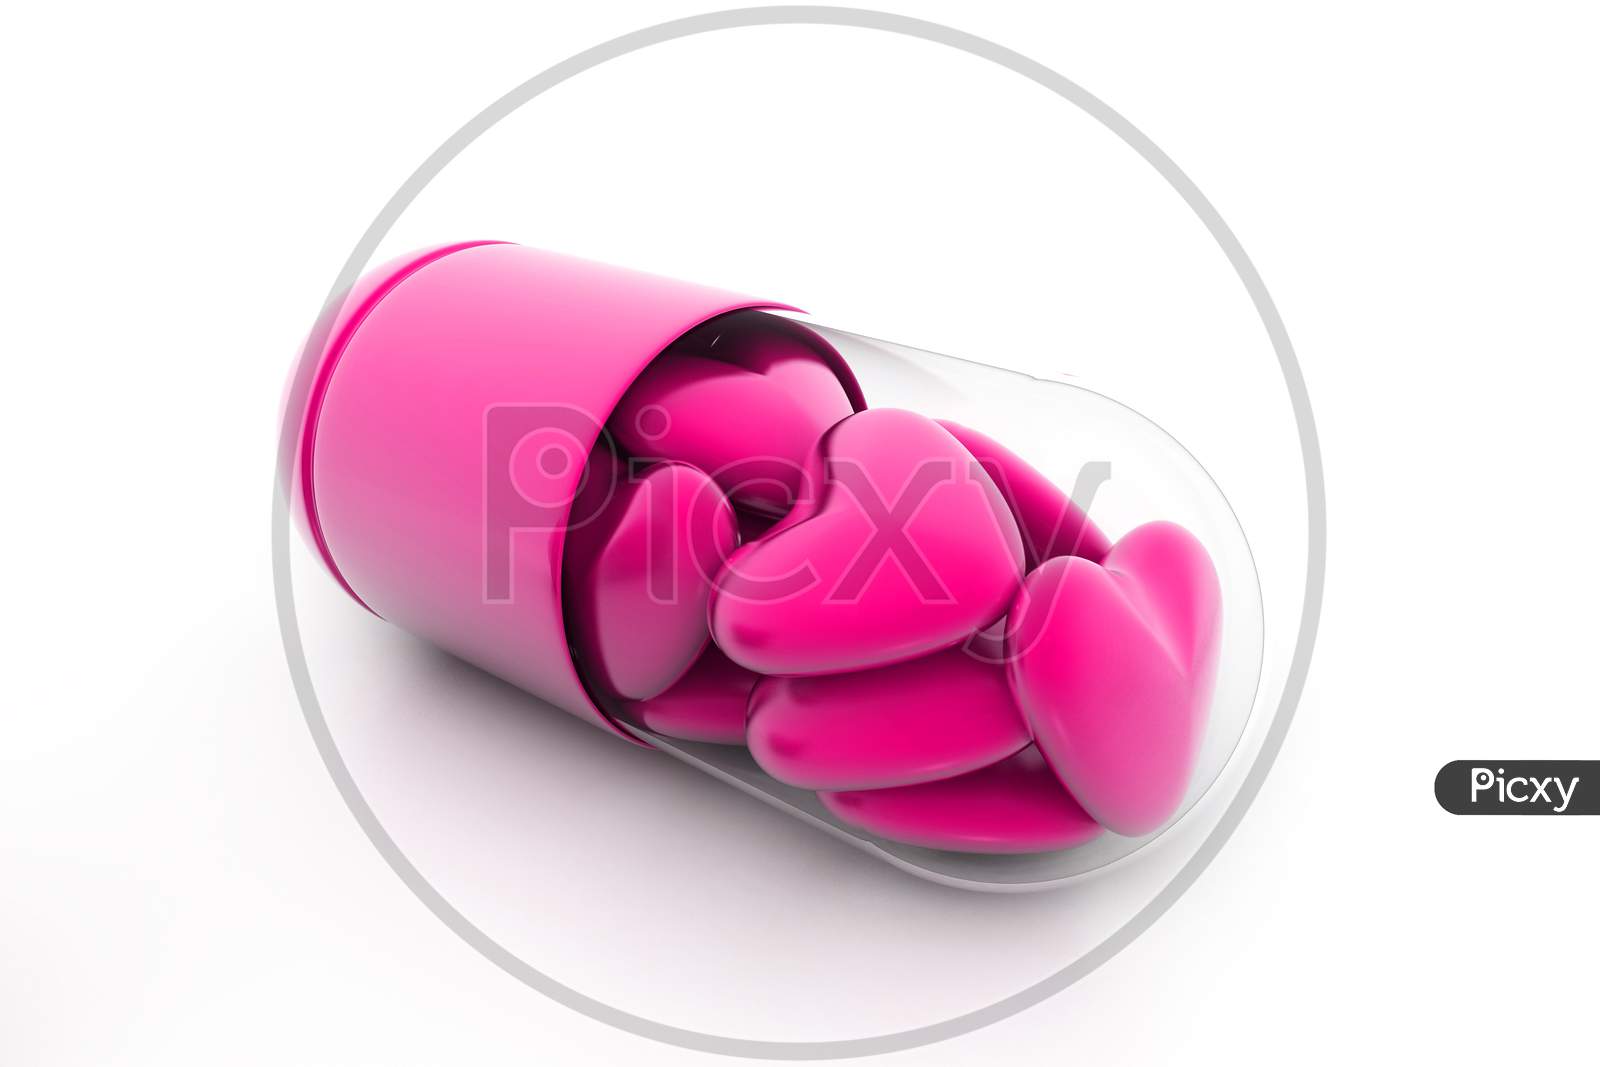 3D Illustration Of Hearts Filled In Pill. Conceptual Design